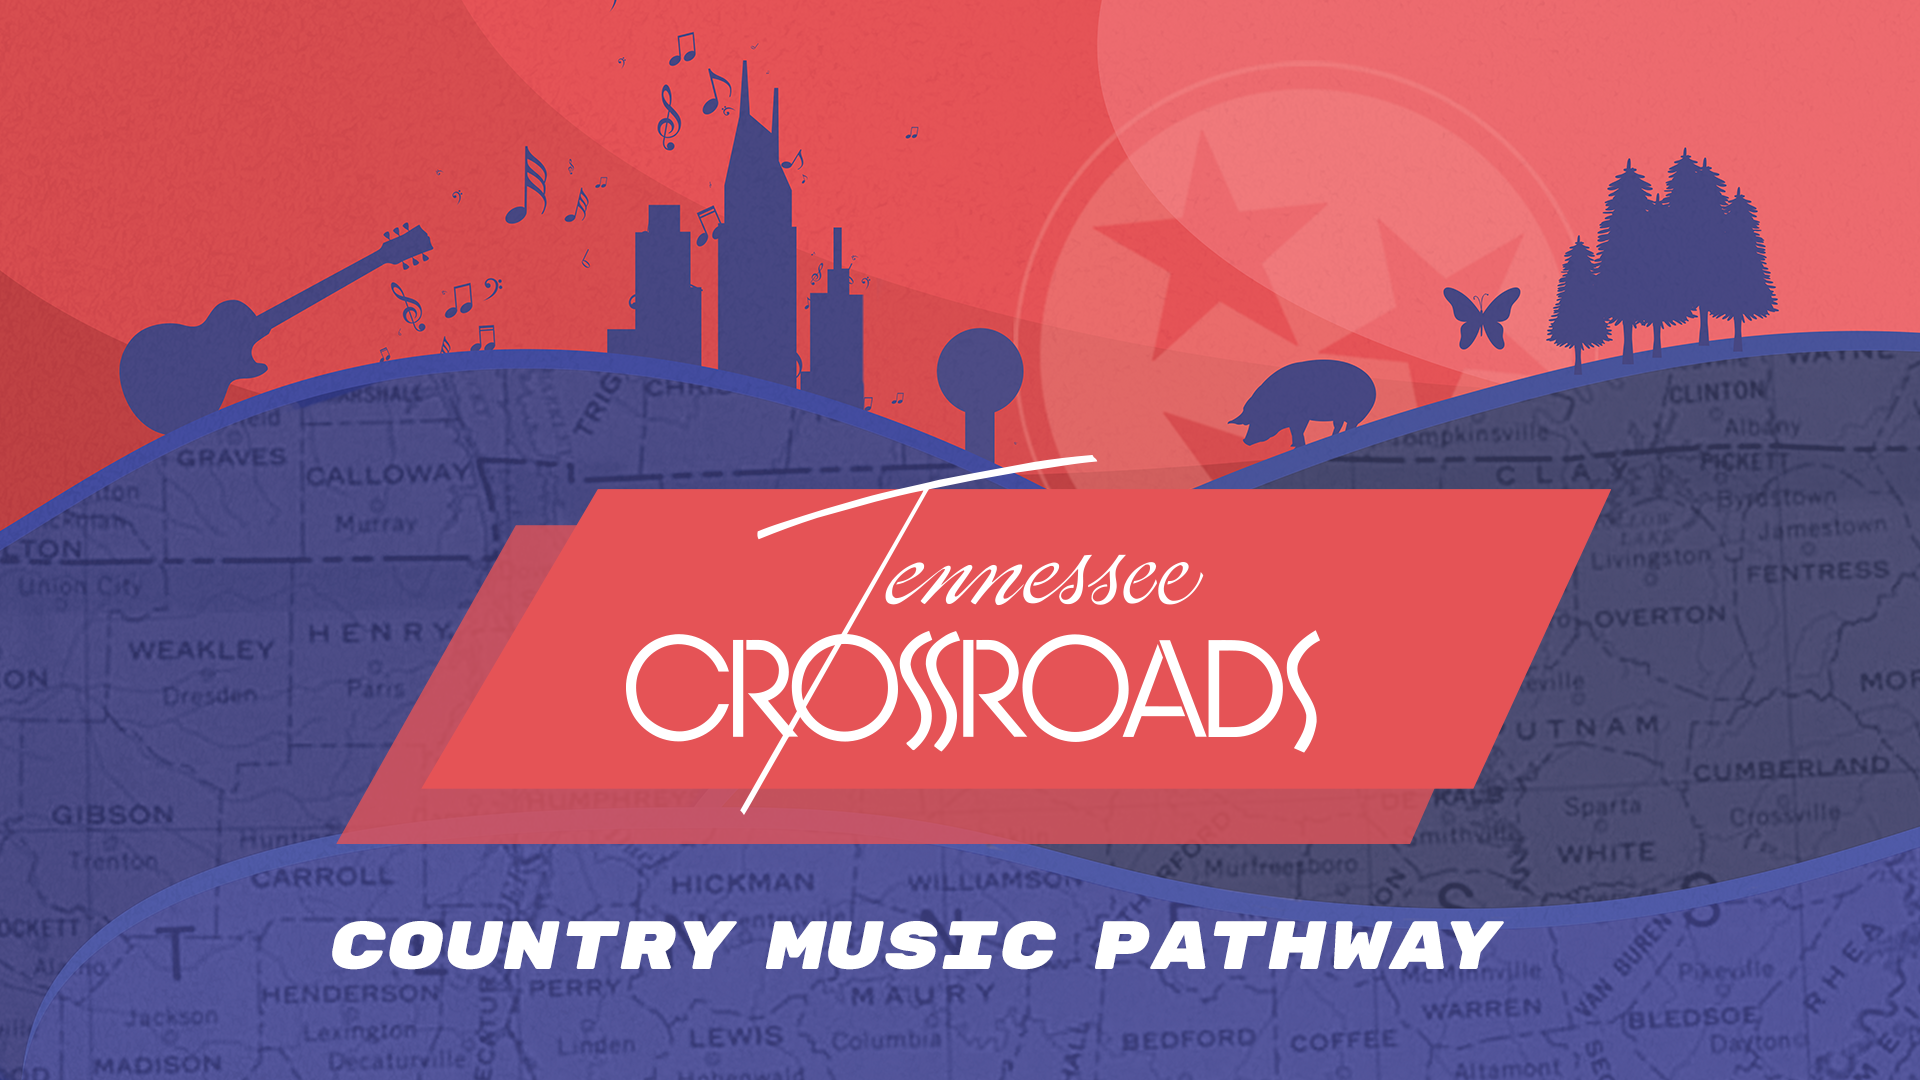 Tennessee Crossroads Country Music Pathway